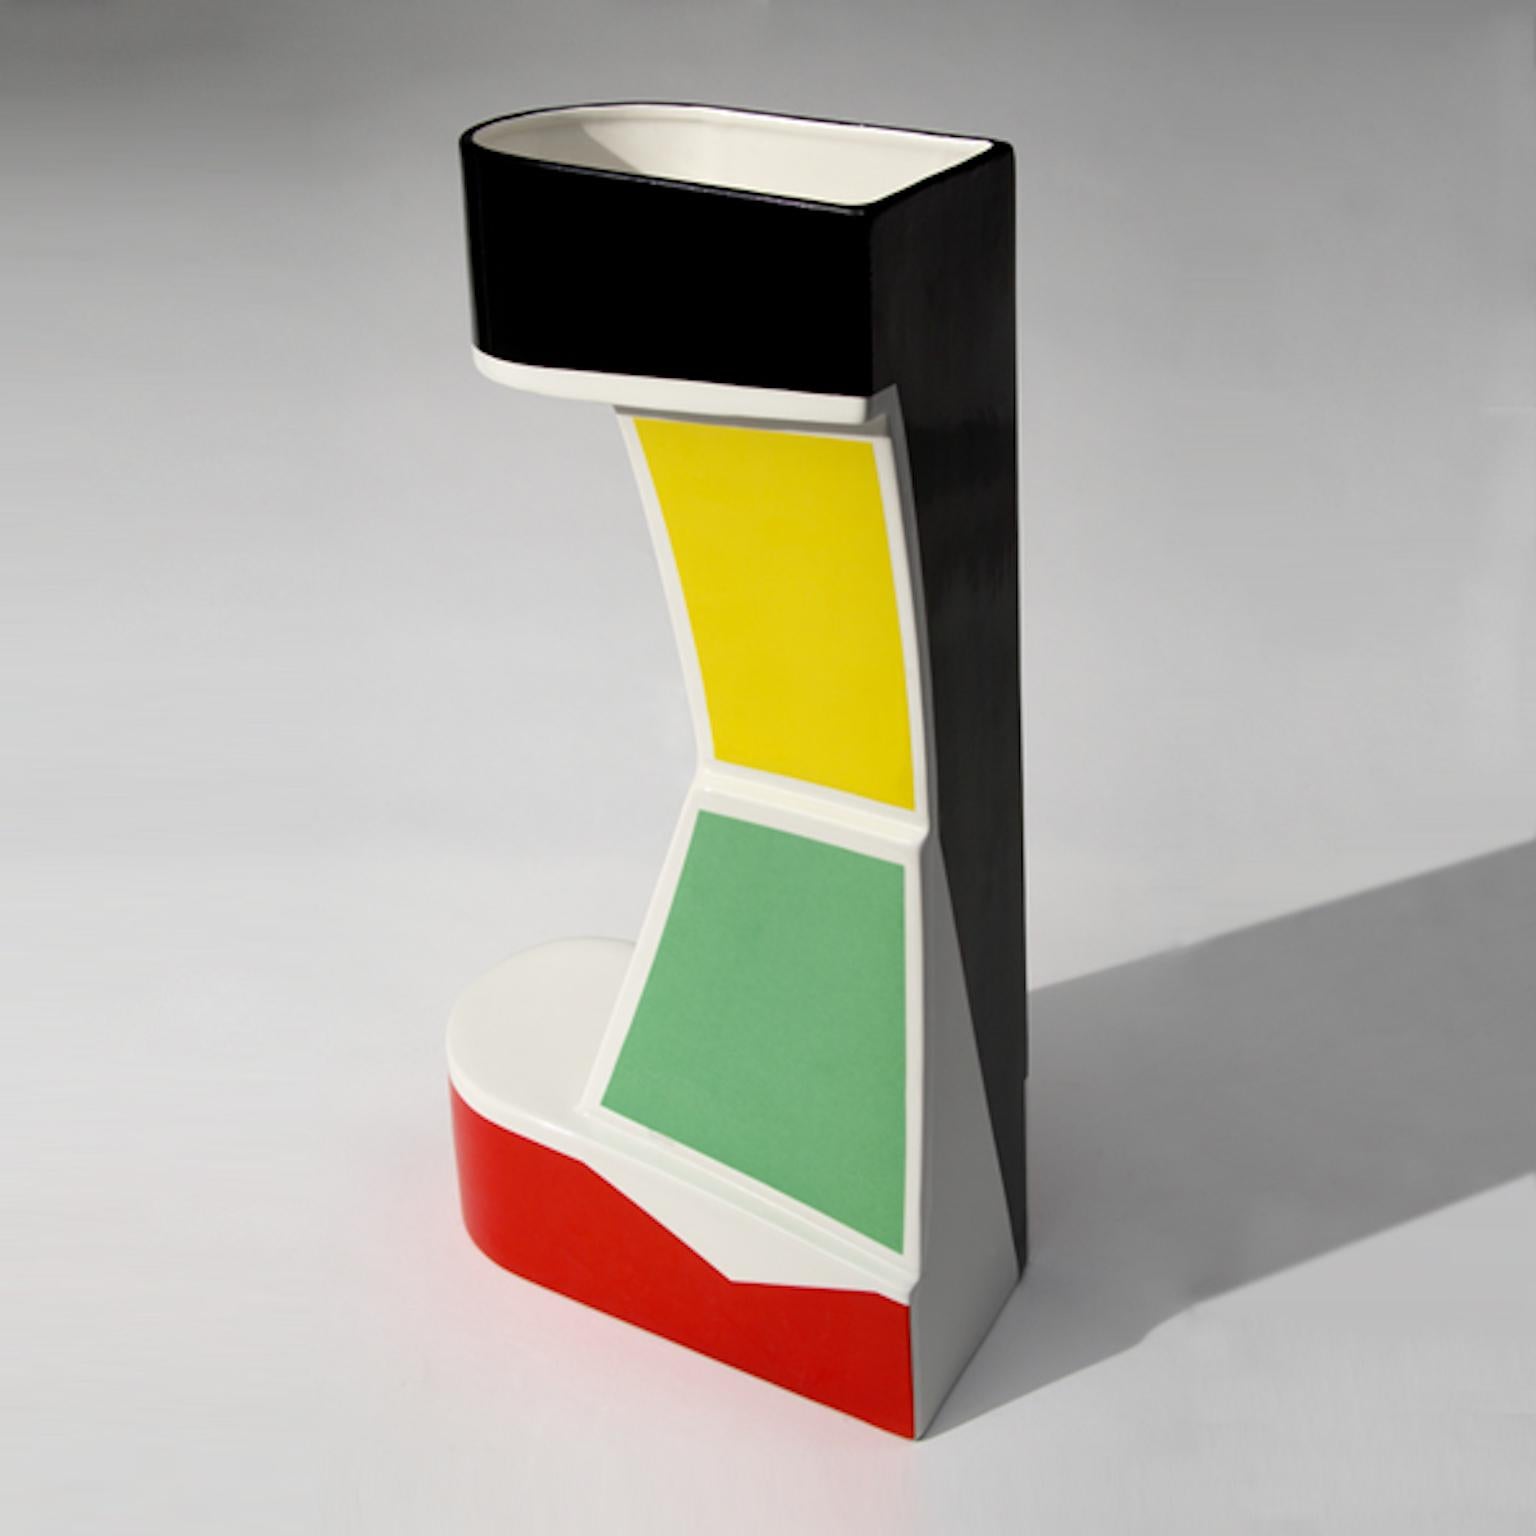 Modern Italian Ceramic Vase Black Model by George Sowden for Superego Editions. For Sale